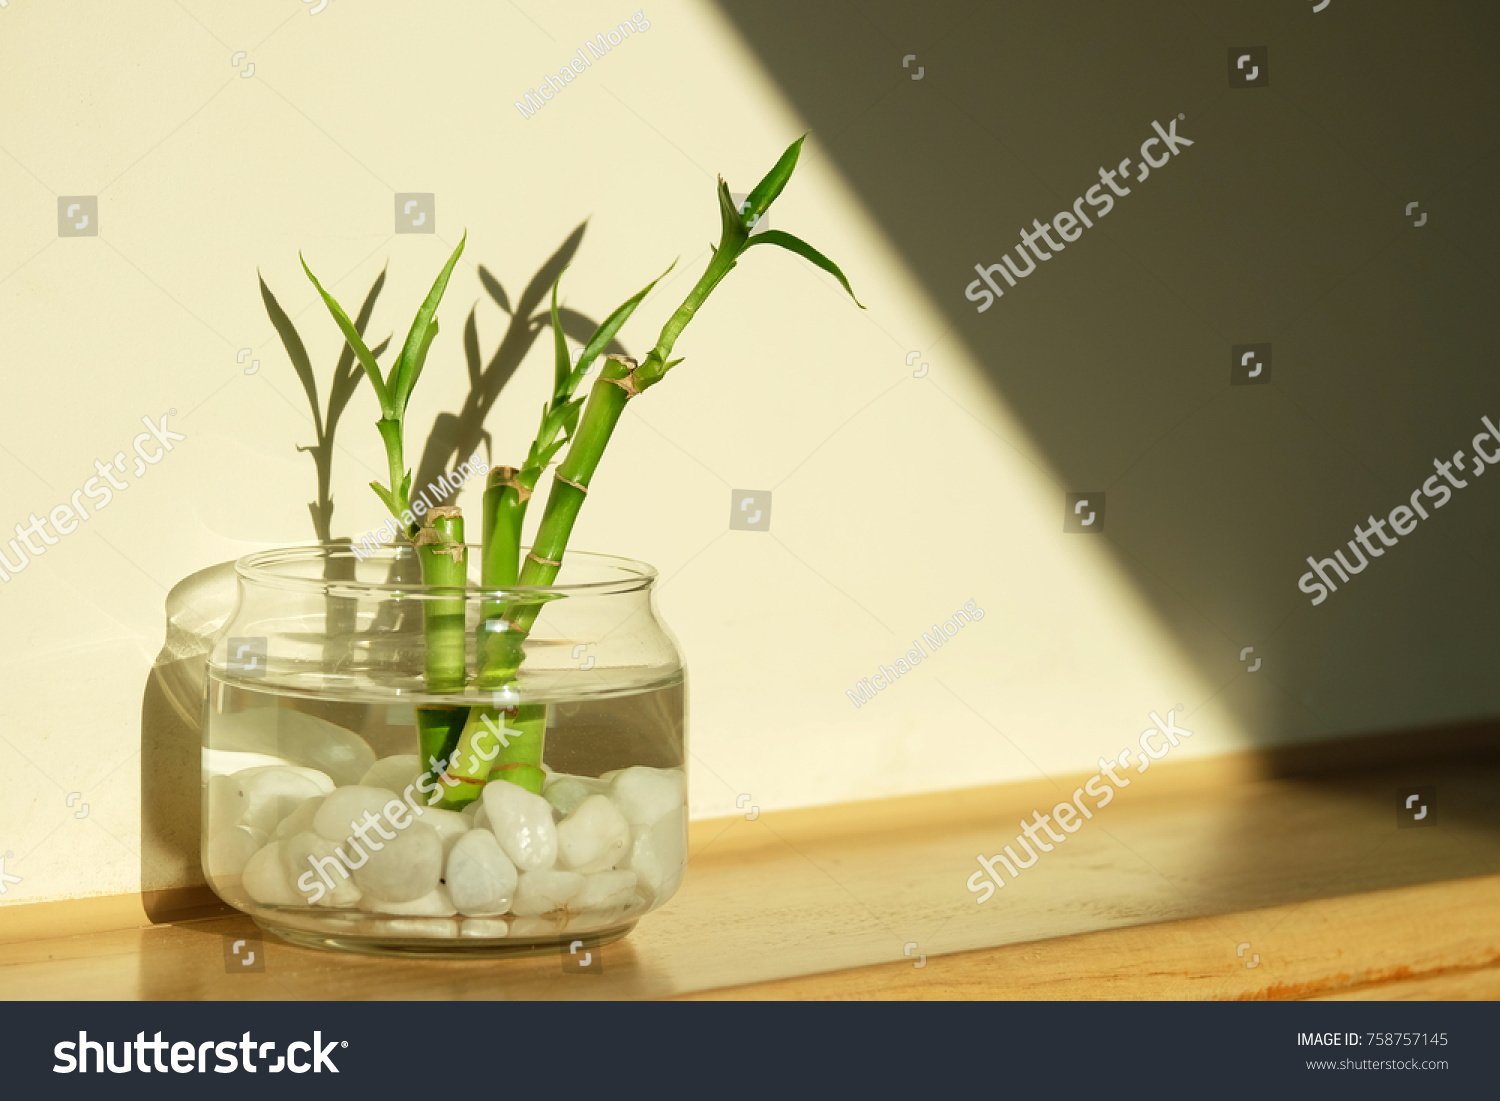 Green lucky bamboo as known as scientific name, Dracaena braunii, or Ribbon plant, or belgian evergreen in glass water jar with beautiful light and shadow #758757145